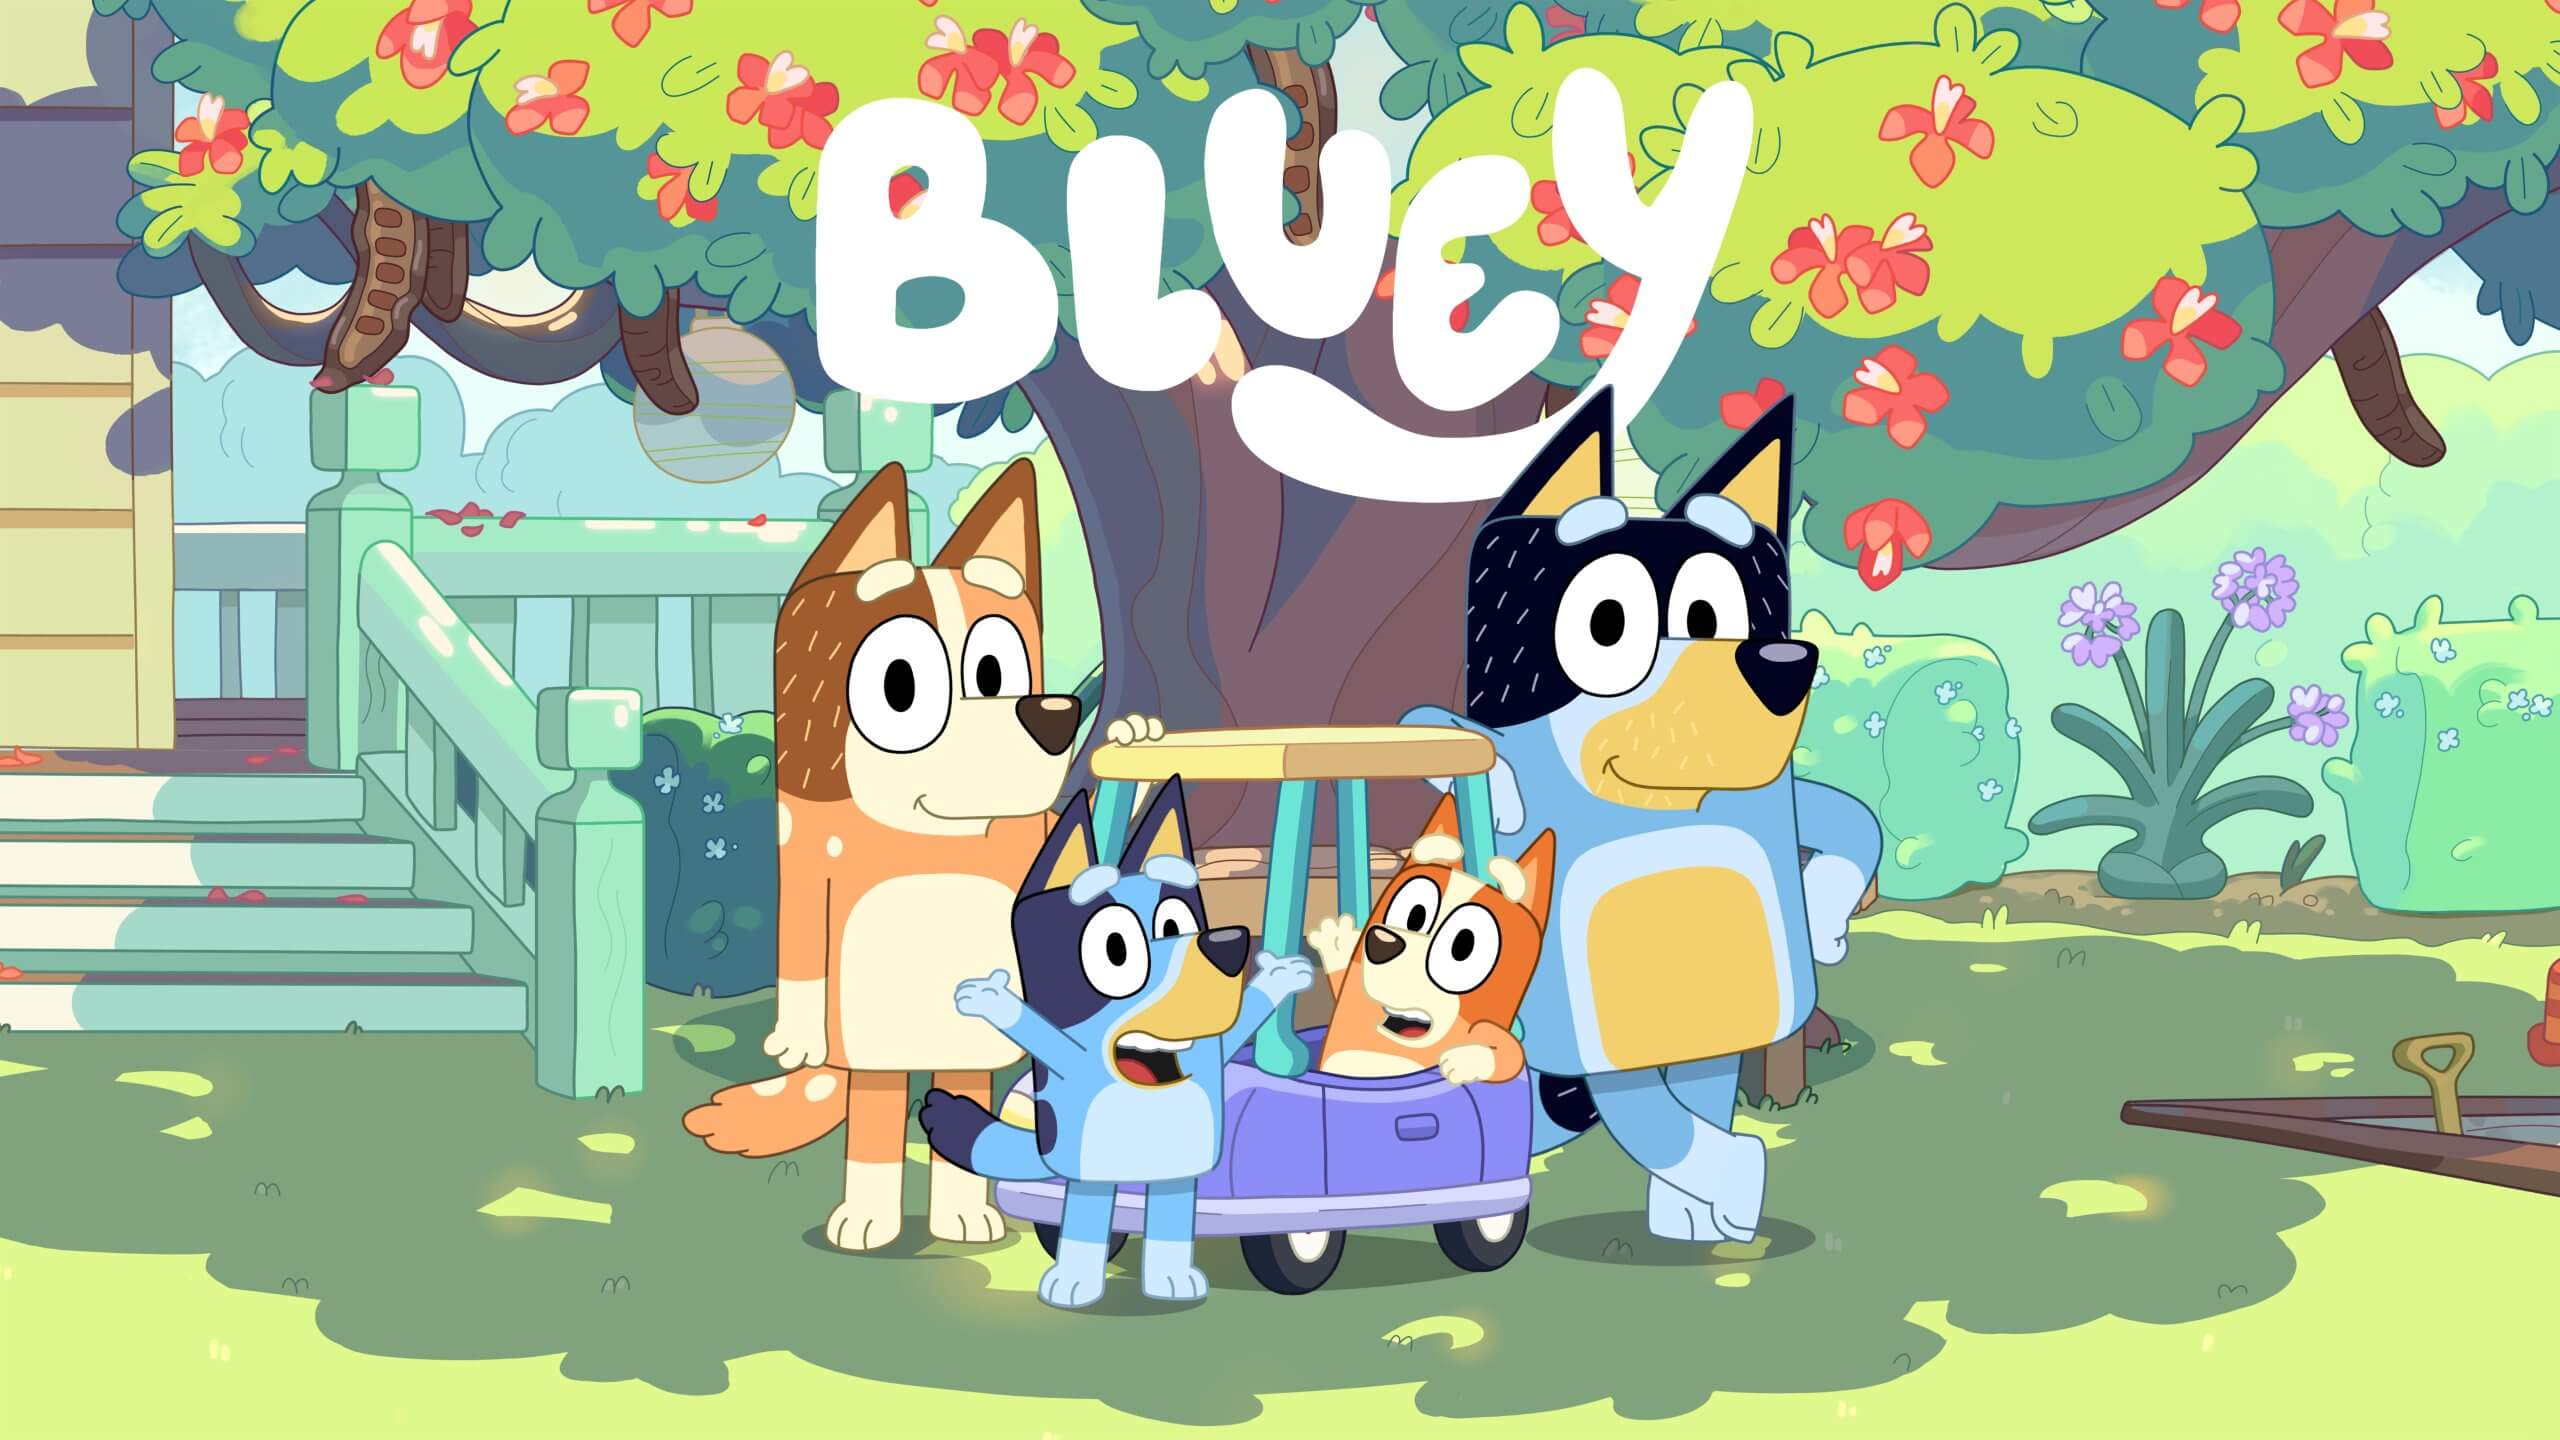 Bluey’s Second Season launches in Italy on Rai Yoyo as of December 26th image